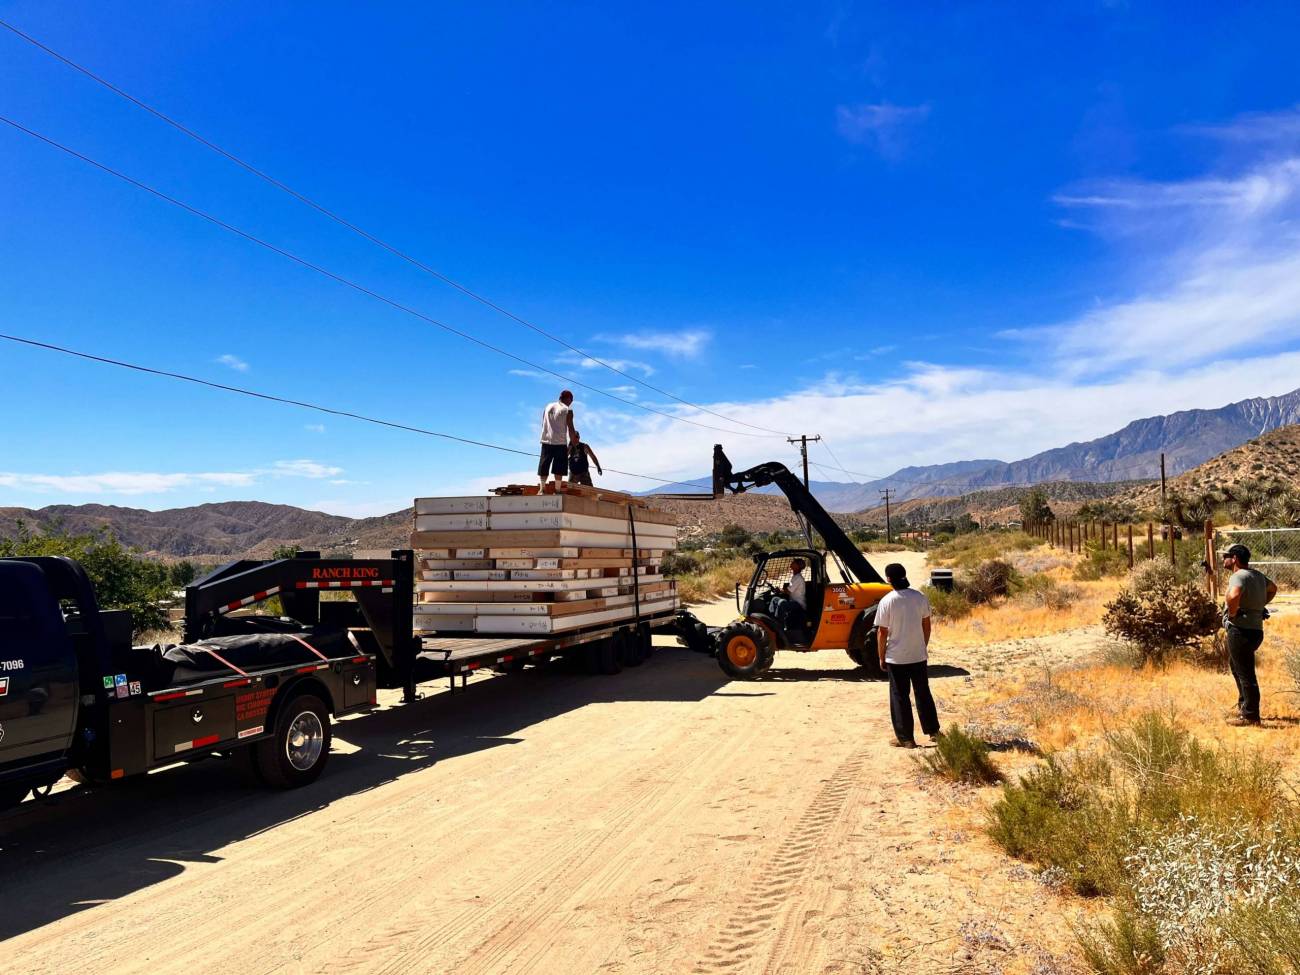 panels and materials arrive by truck on morongo valley